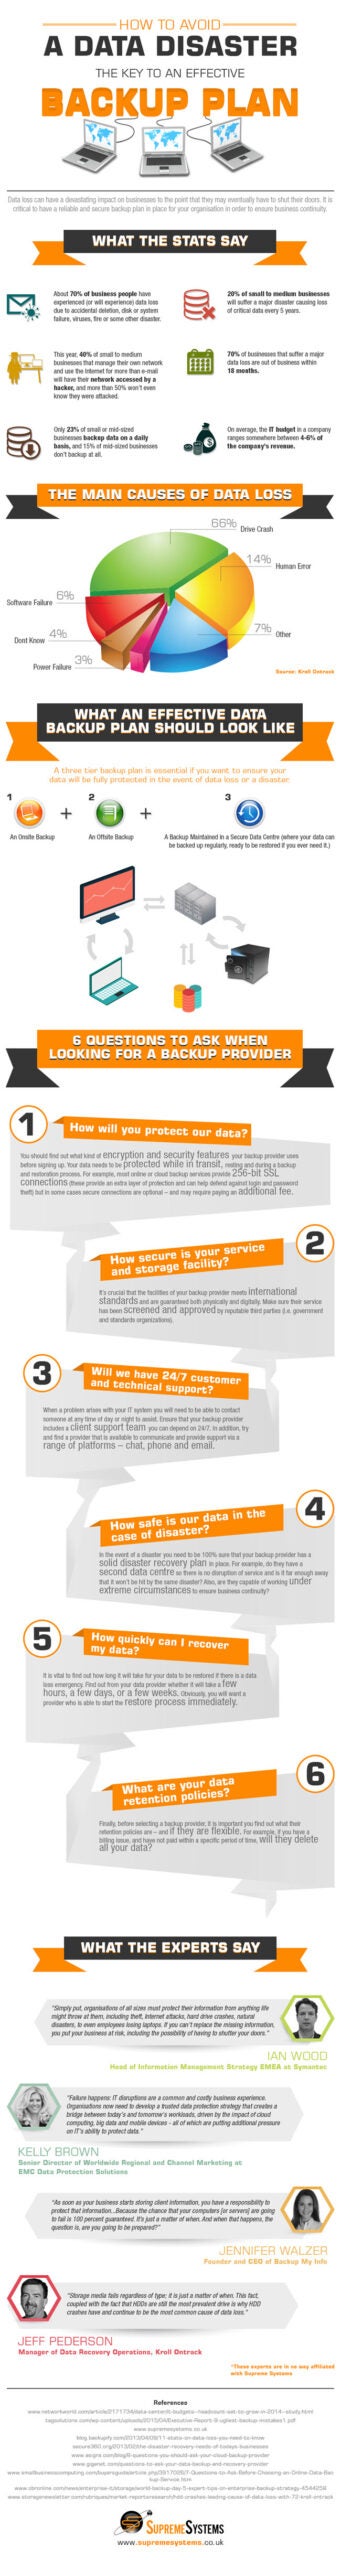 How-to-avoid-a-data-disaster-Infographic